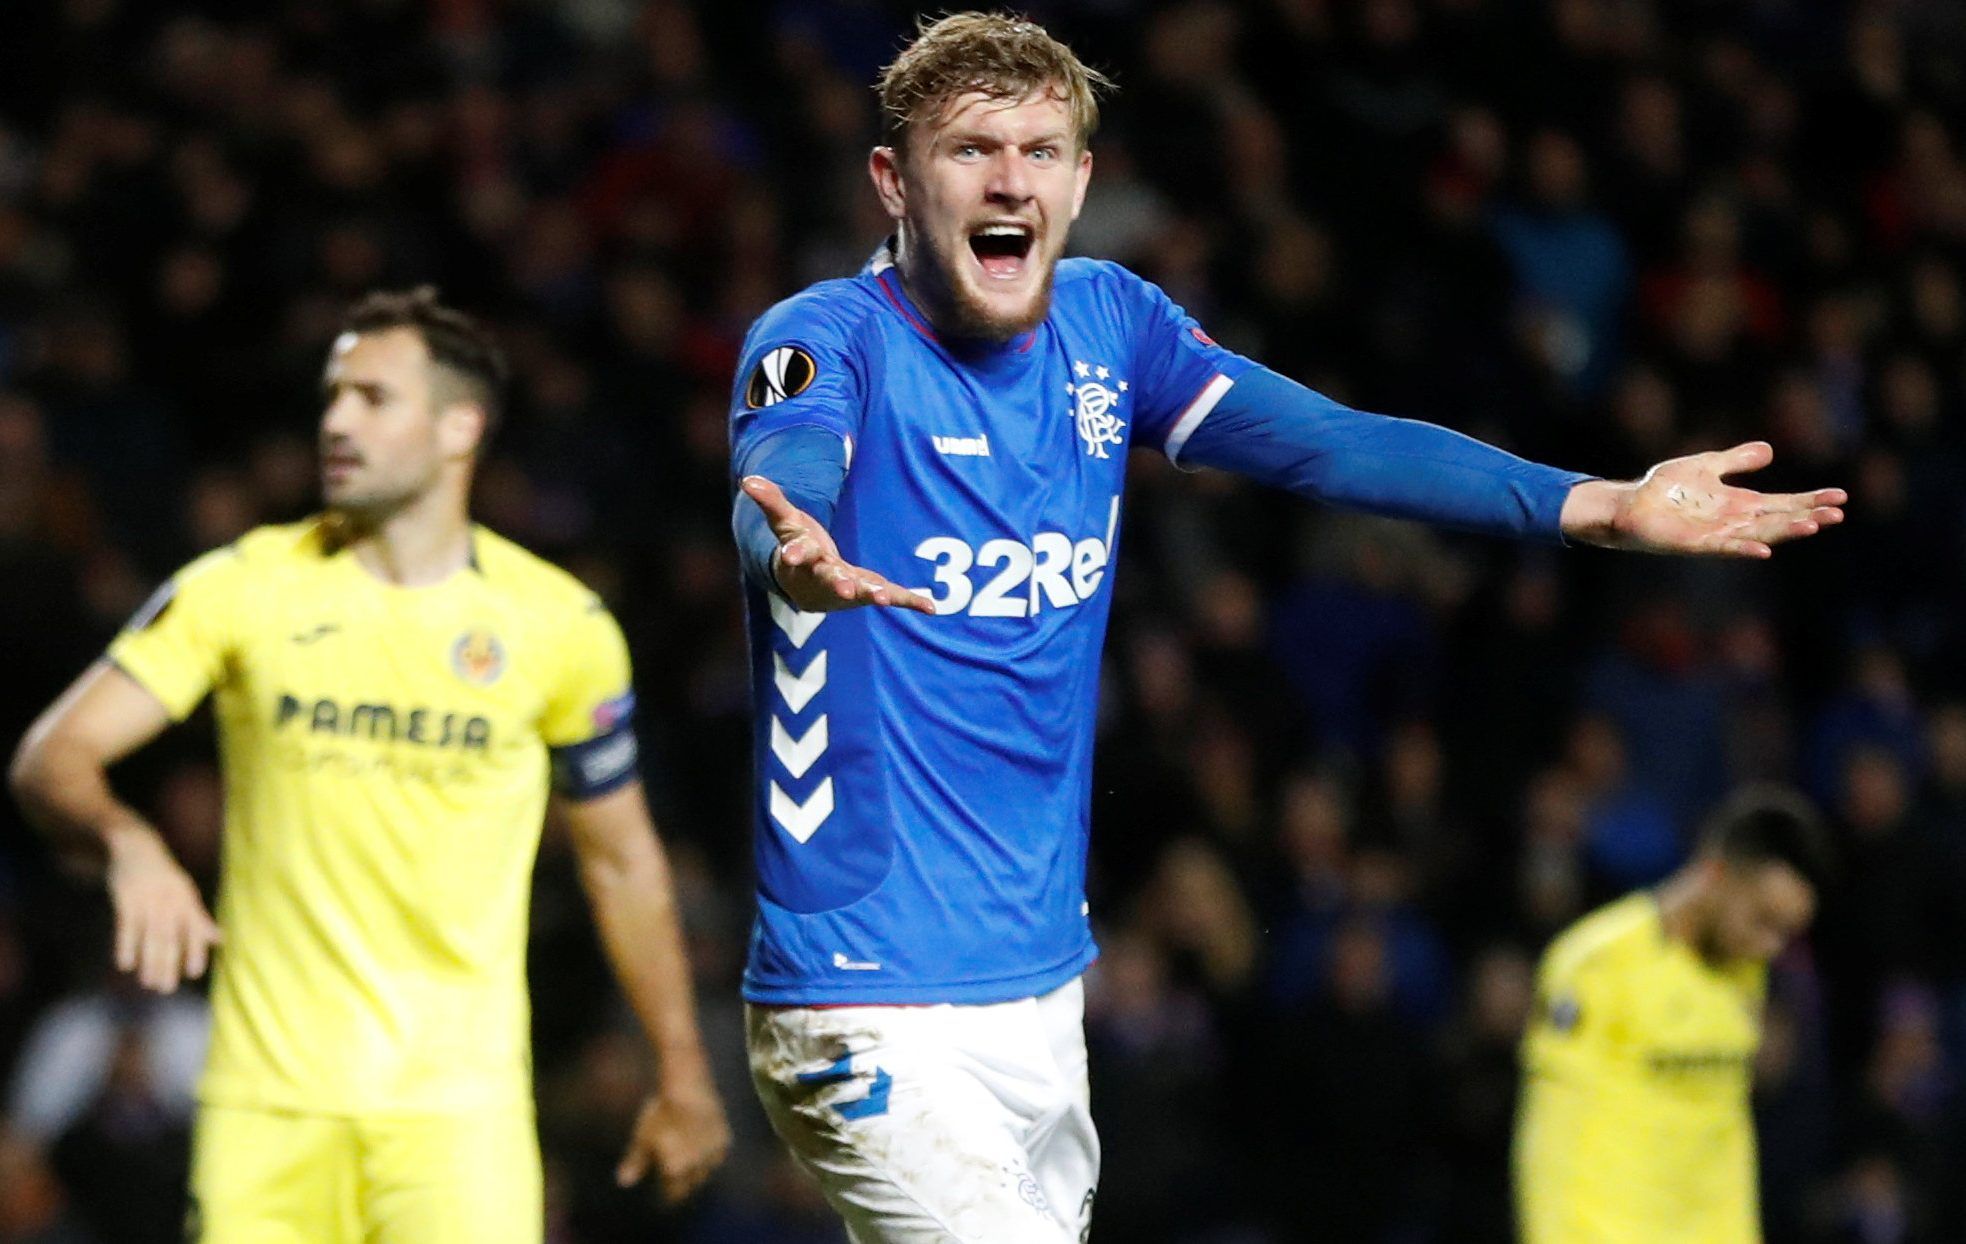 Soccer Football - Europa League - Group Stage - Group G - Rangers v Villarreal - Ibrox, Glasgow, Britain - November 29, 2018  Rangers' Joseph Worrall reacts during the match                      REUTERS/Russell Cheyne